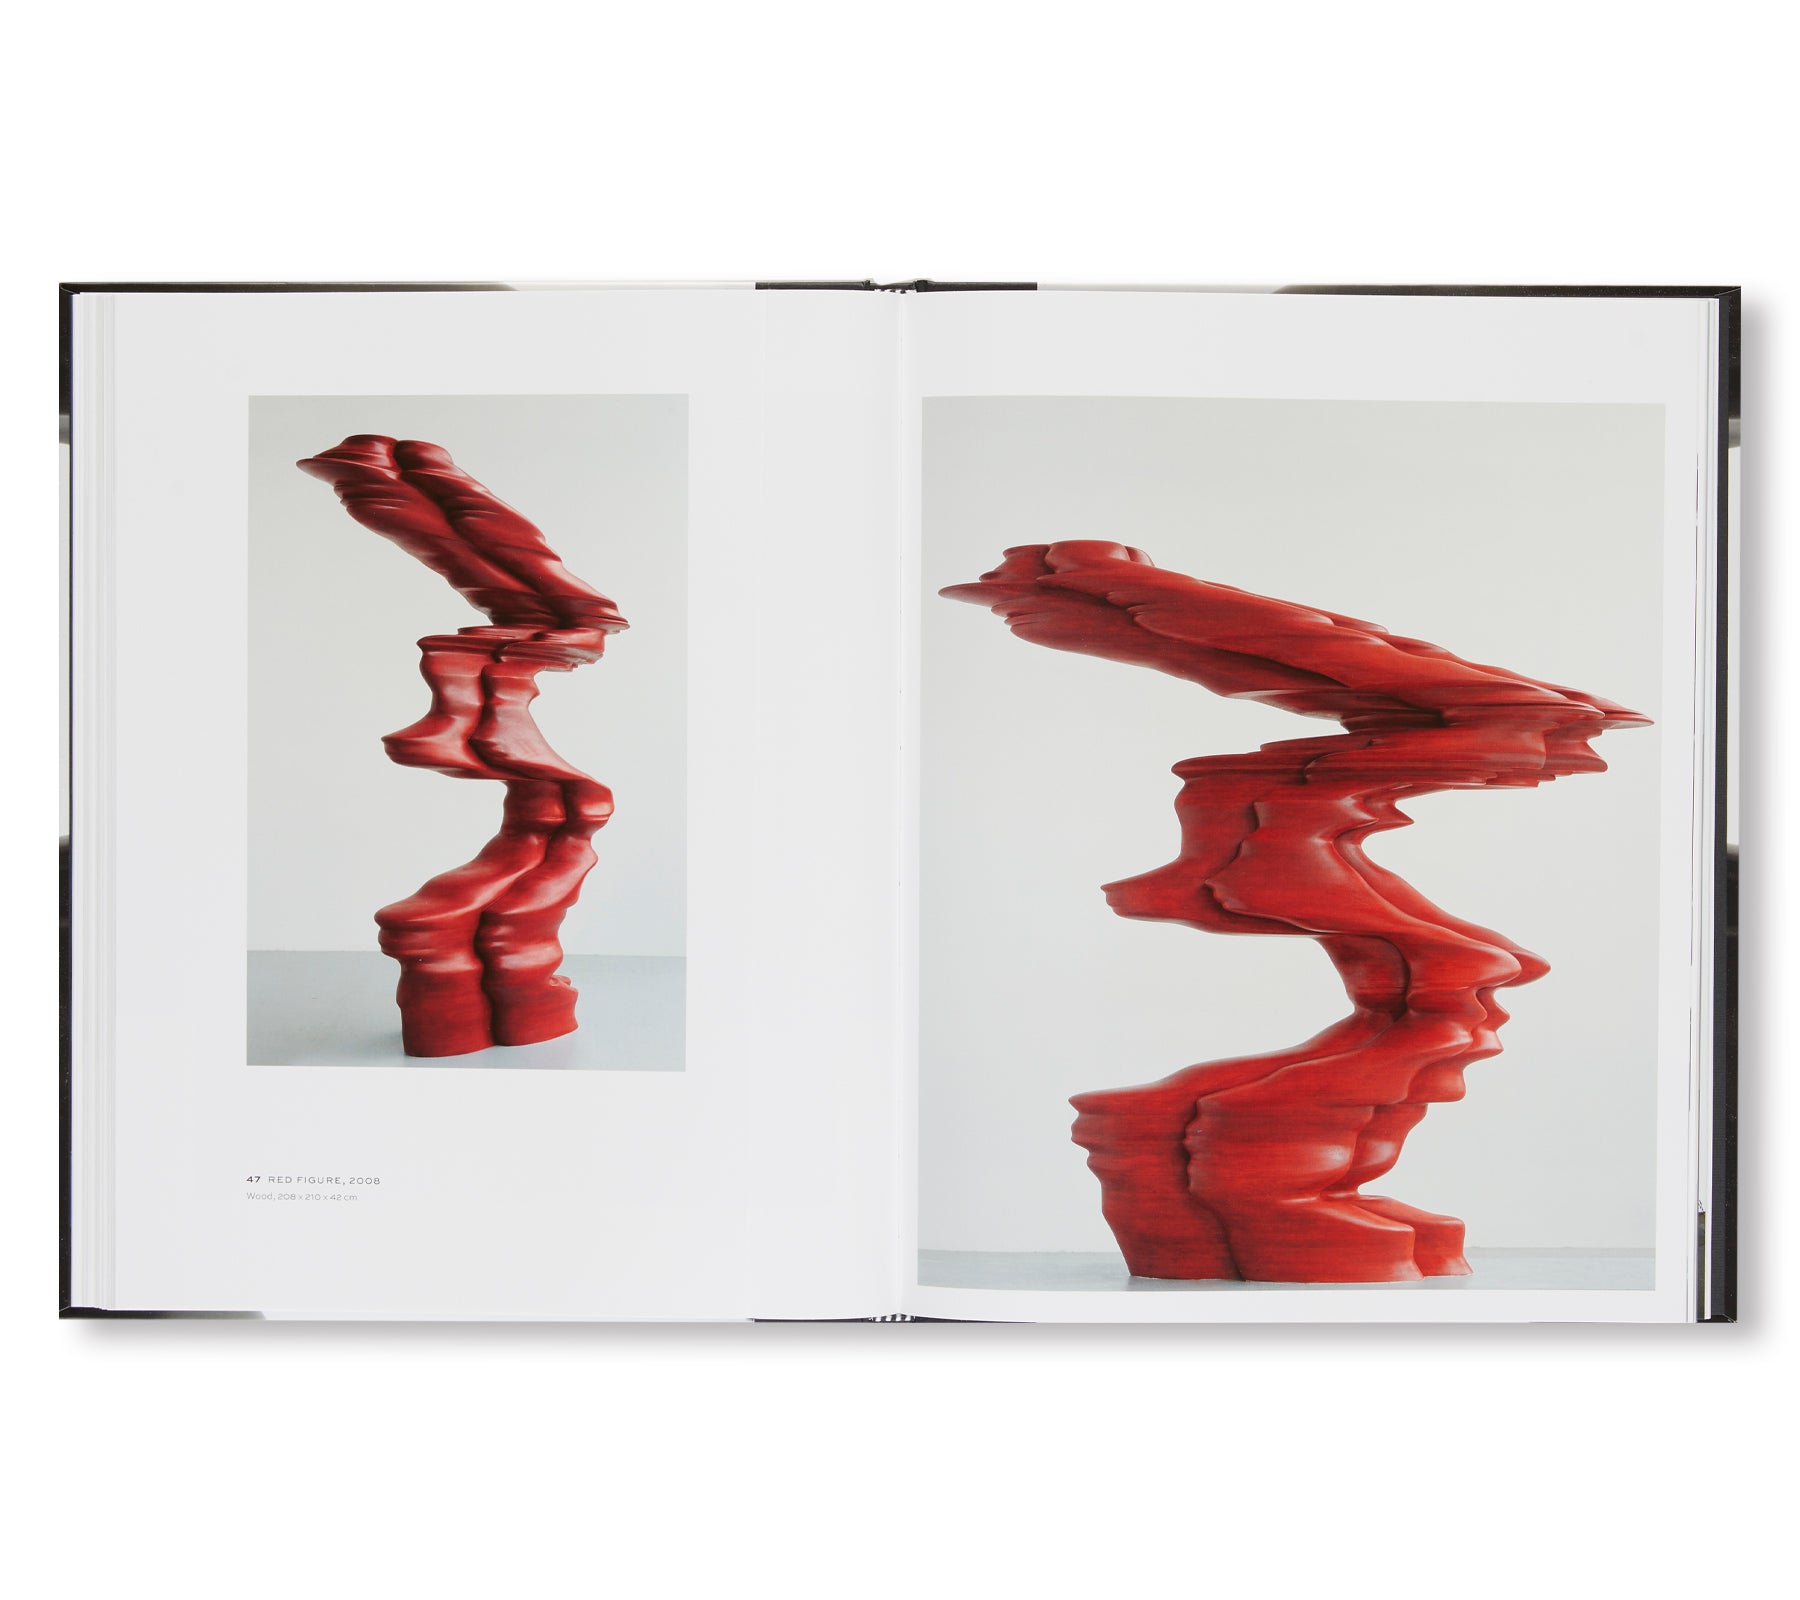 SCULPTURES AND DRAWINGS by Tony Cragg